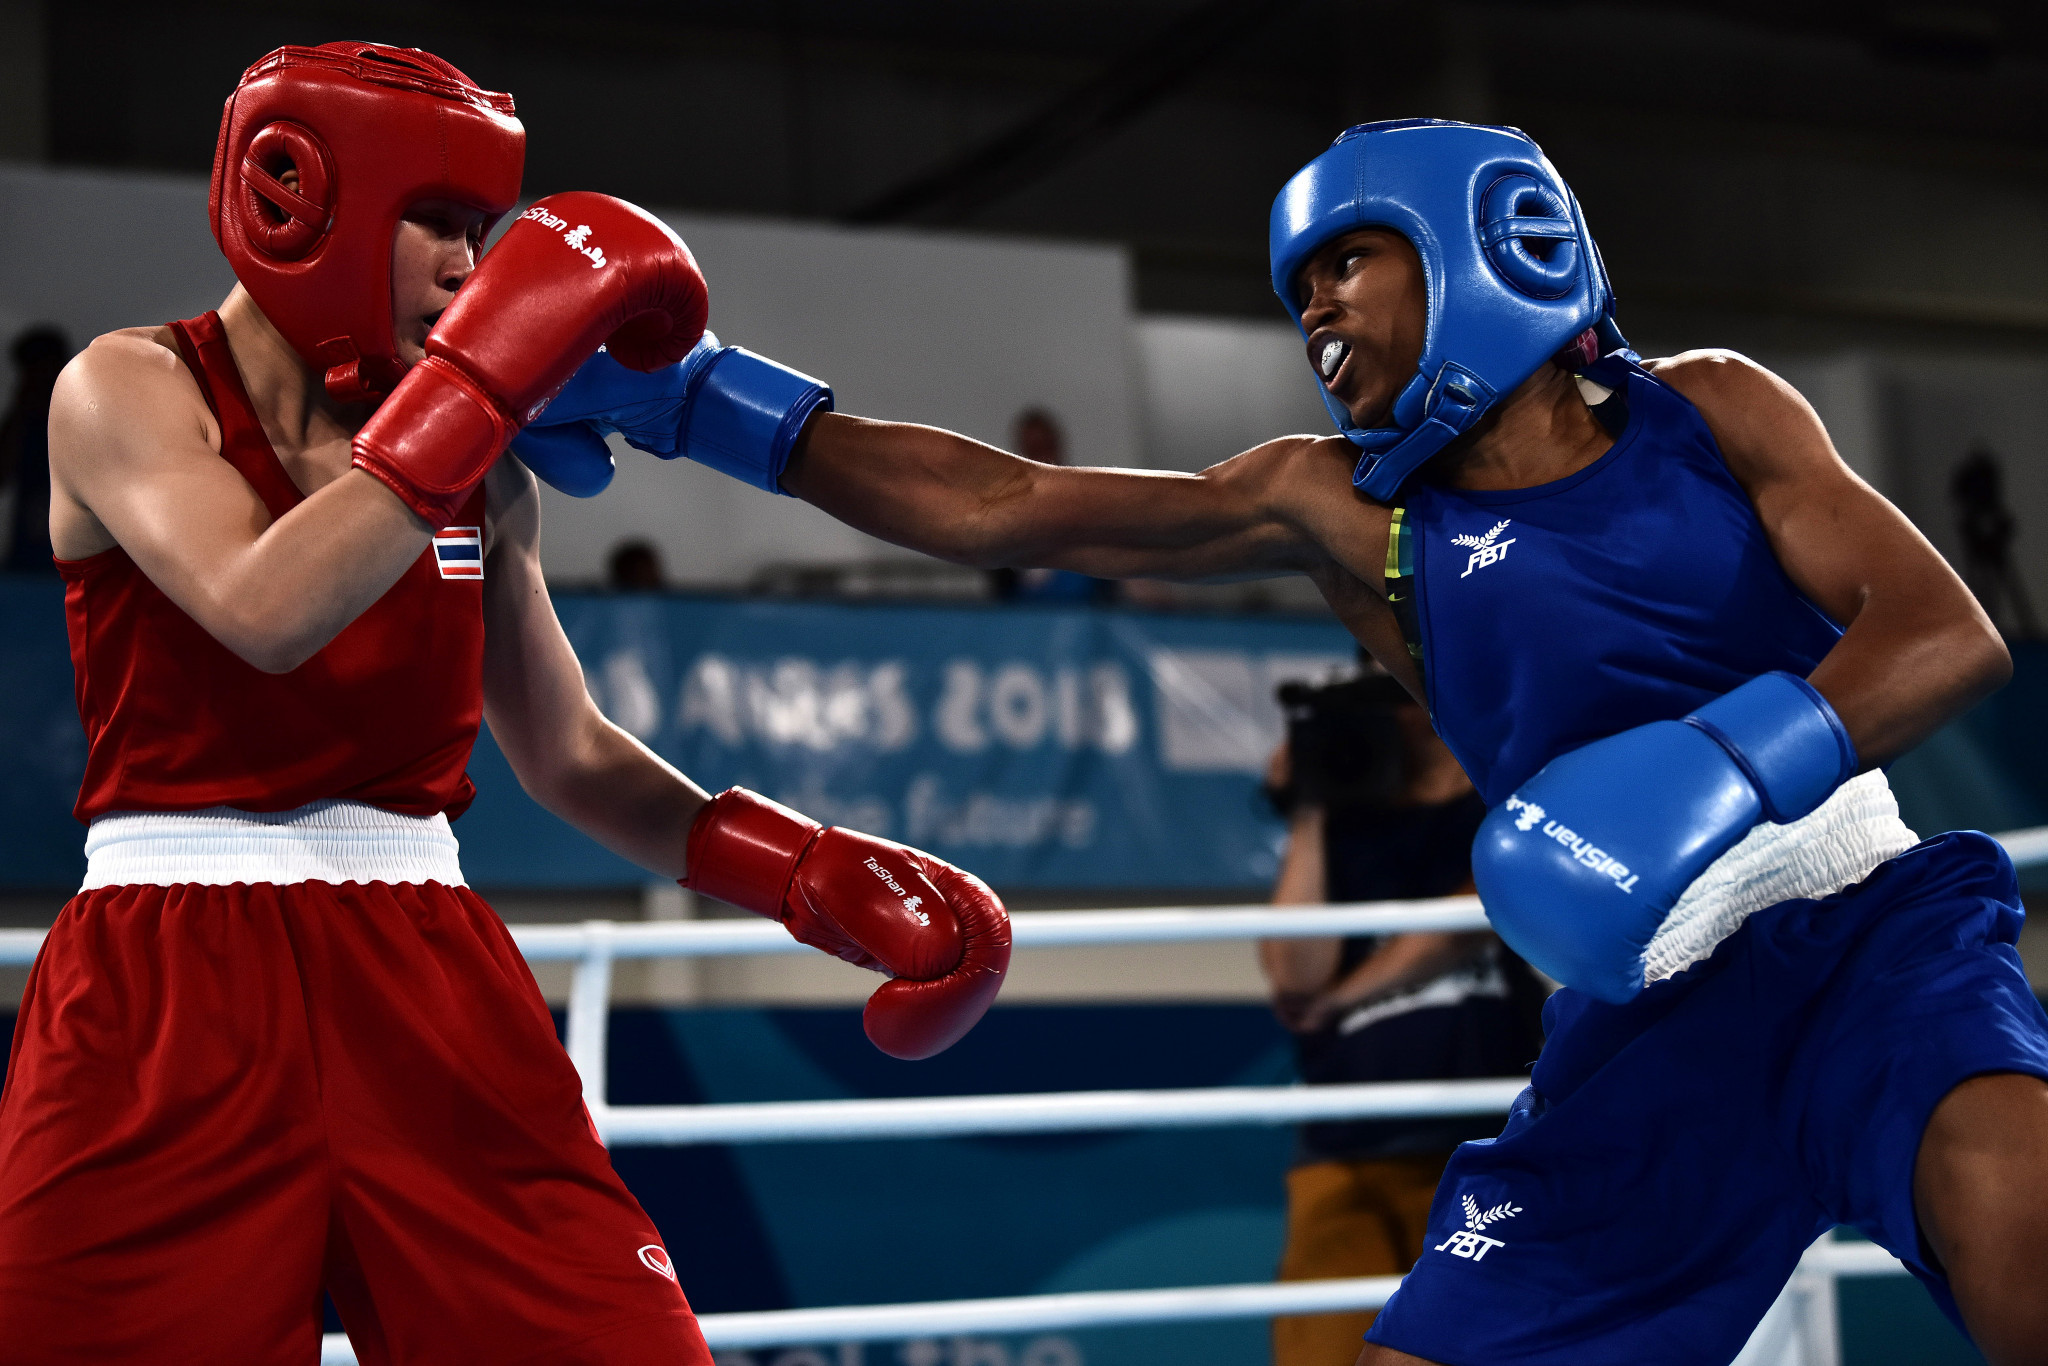 A full report on the refereeing and judging of the boxing event at Buenos Aires 2018 will be given to the IOC ©Getty Images